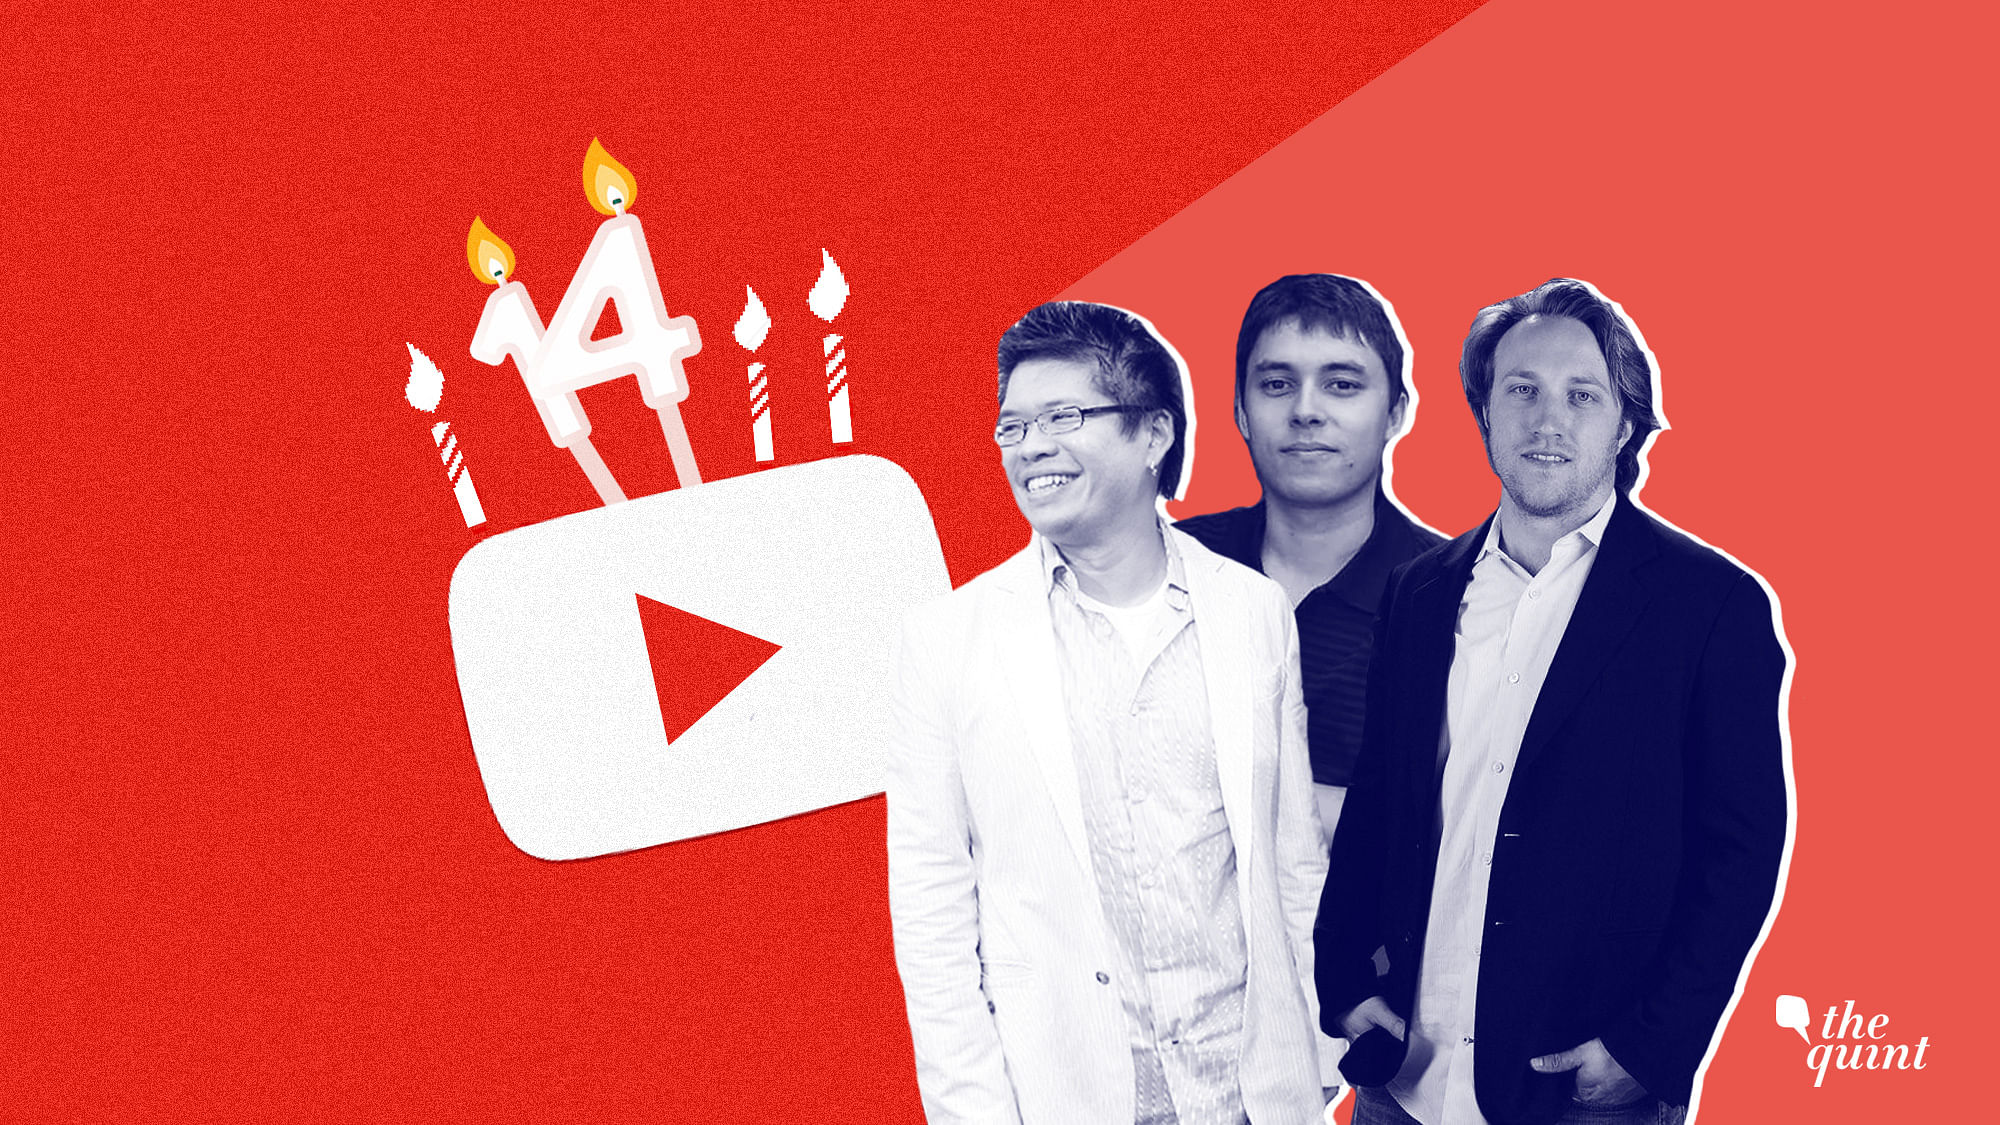 The founder of YouTube, (from left to right) Steve Chen, Jawed Karim and Chad Hurley.